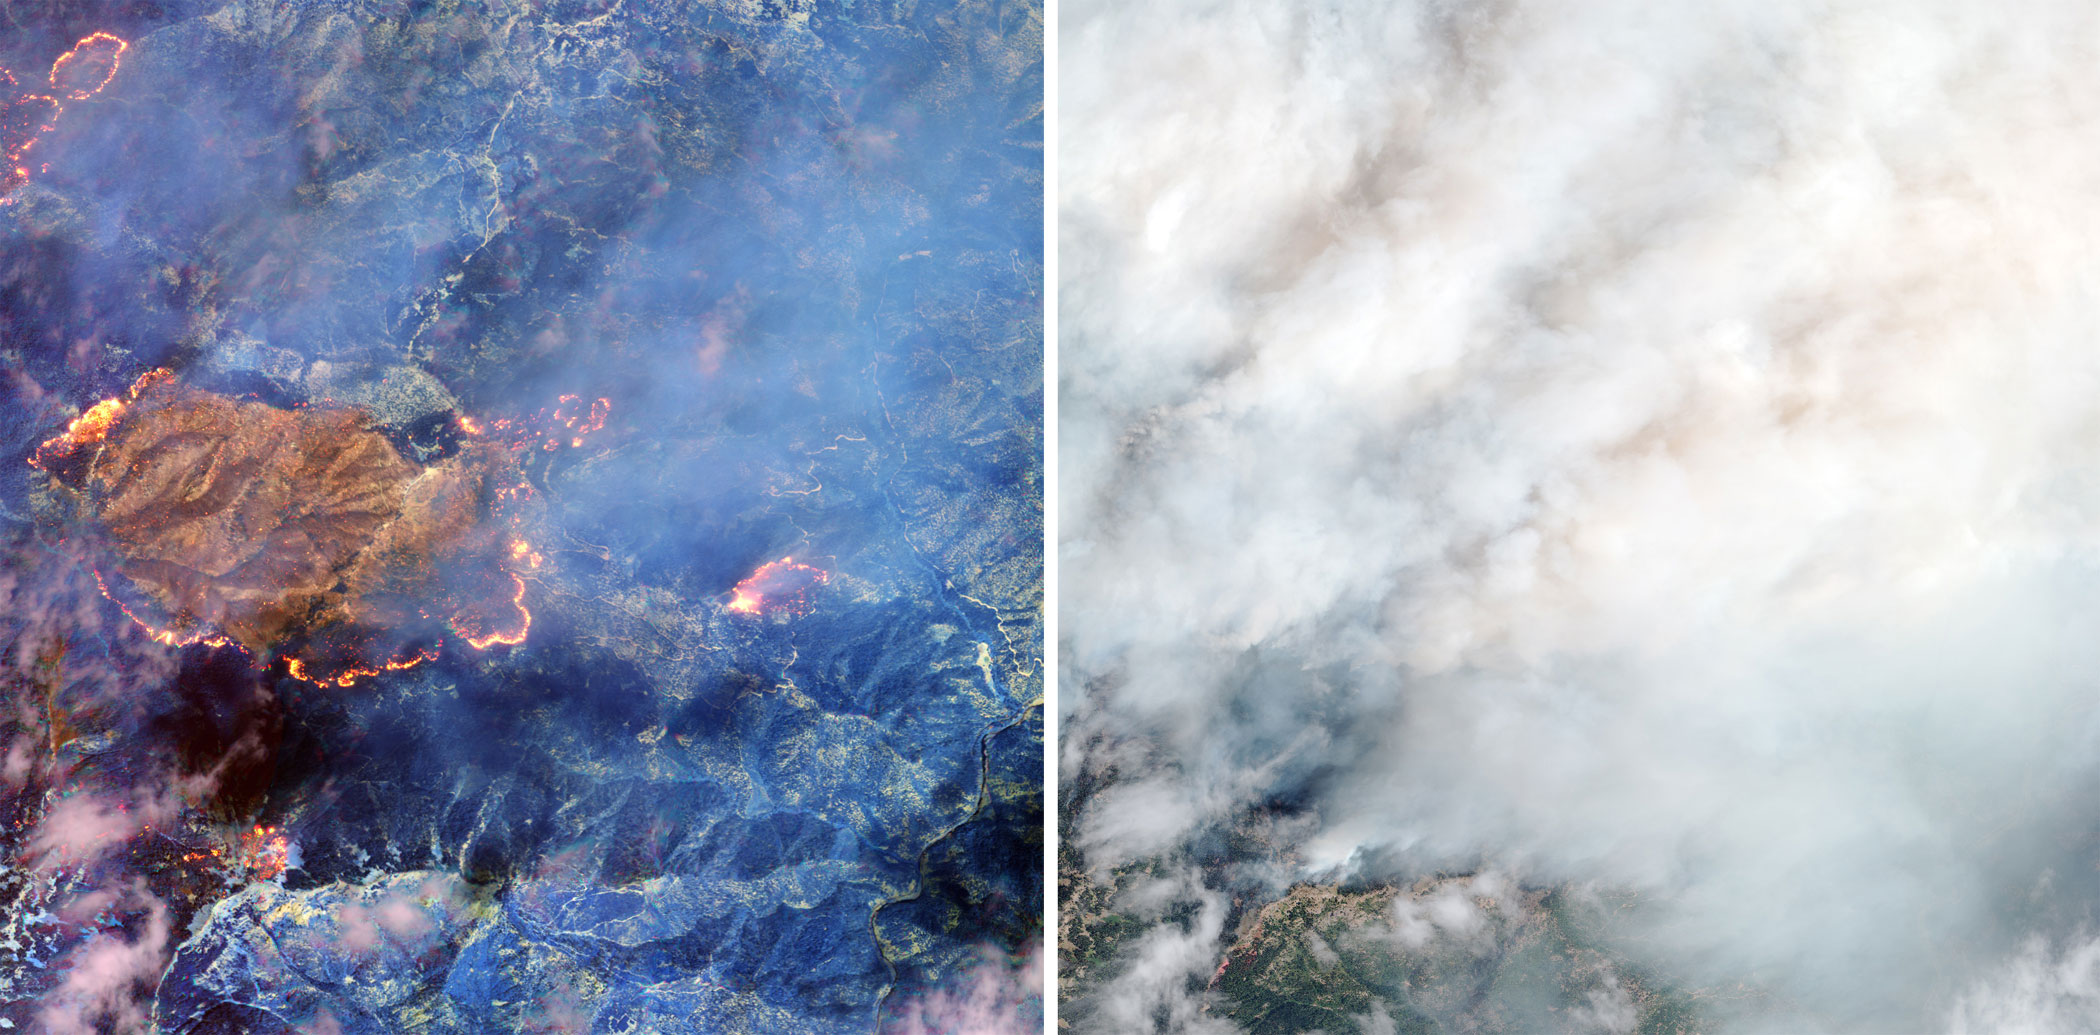 A forest fire at the Happy Camp complex in California’s Klamath National Forest imaged with (left) and without (right) SWIR, in Aug. 2014. (Courtesy of DigitalGlobe)